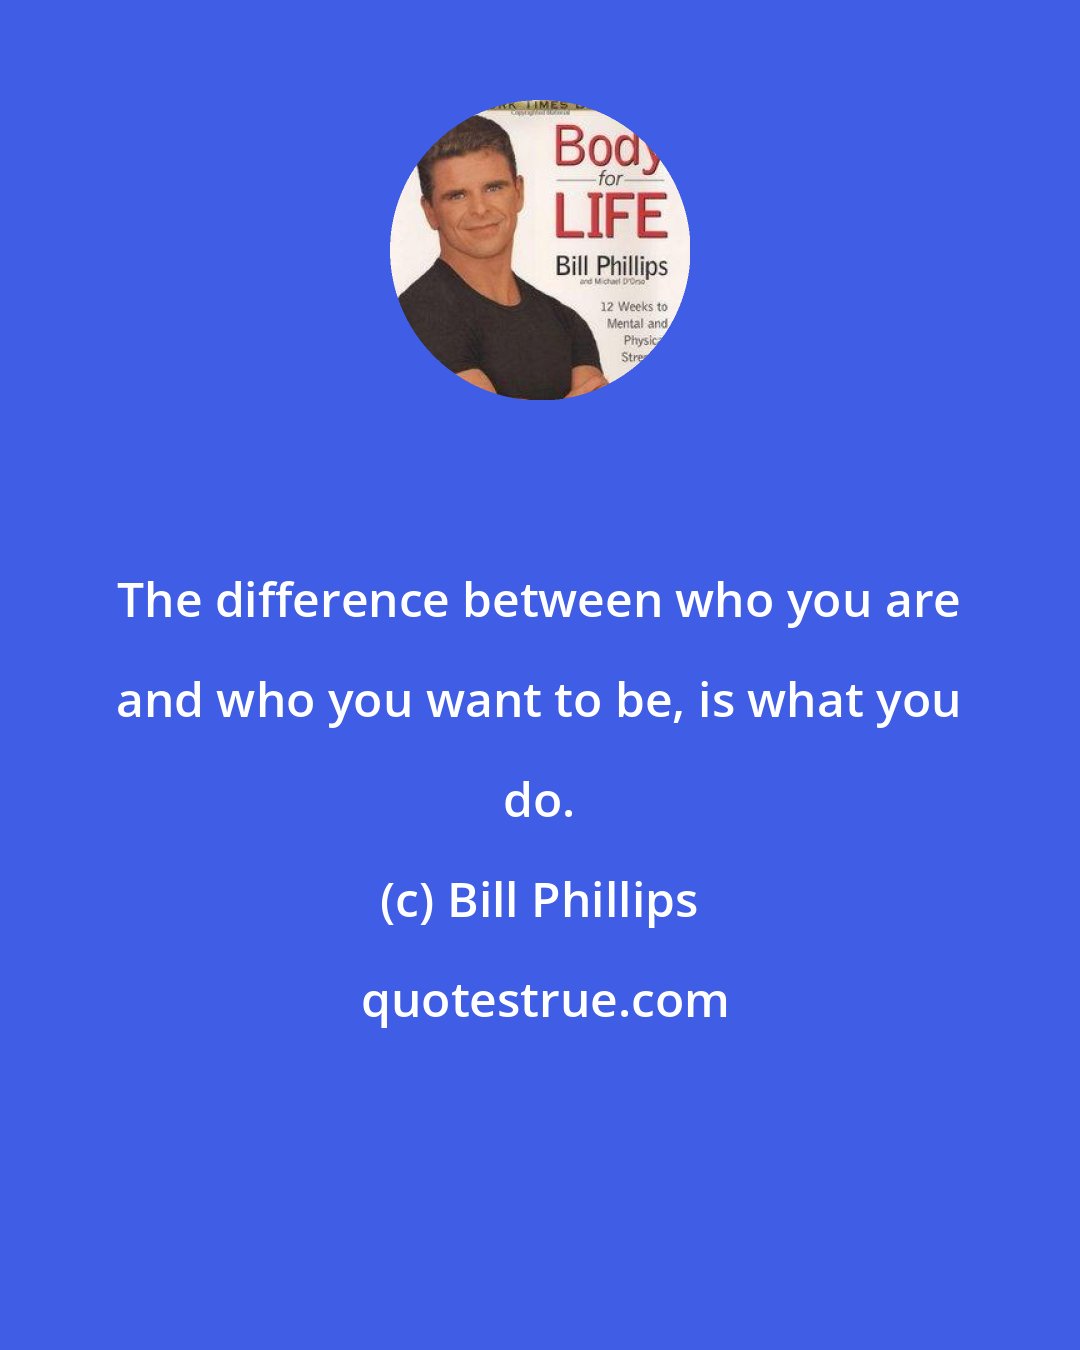 Bill Phillips: The difference between who you are and who you want to be, is what you do.